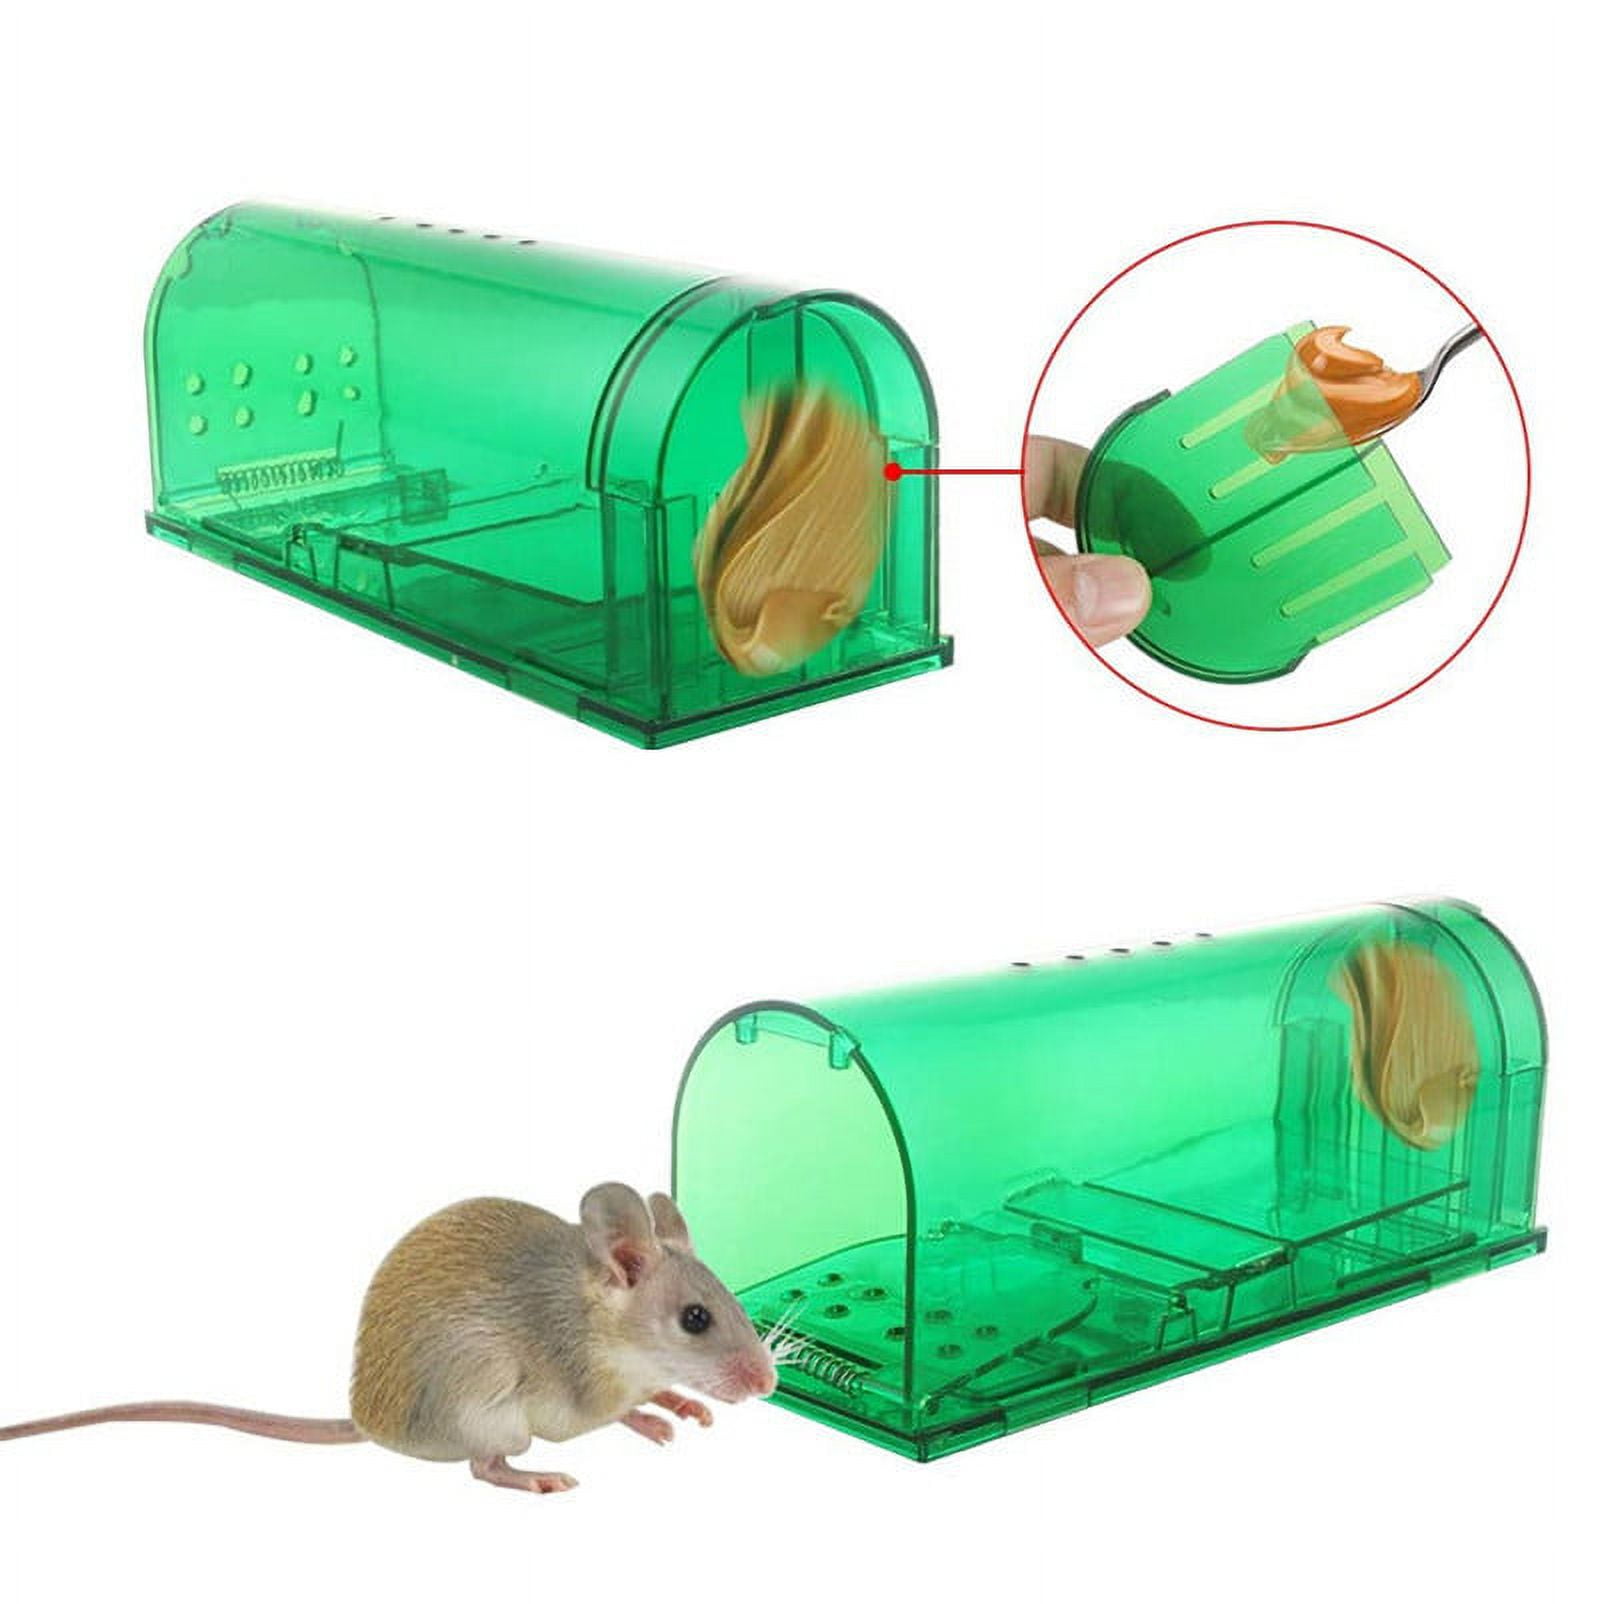 Humane Mouse Traps, Catch& Release, Reusable Rat Traps, Easy To Set And  Safe For Family And Pets, No Kill For Small Rodent/Voles/Hamsters/Moles,  Catcher That Works For Indoor/Outdoor, 4 Pack